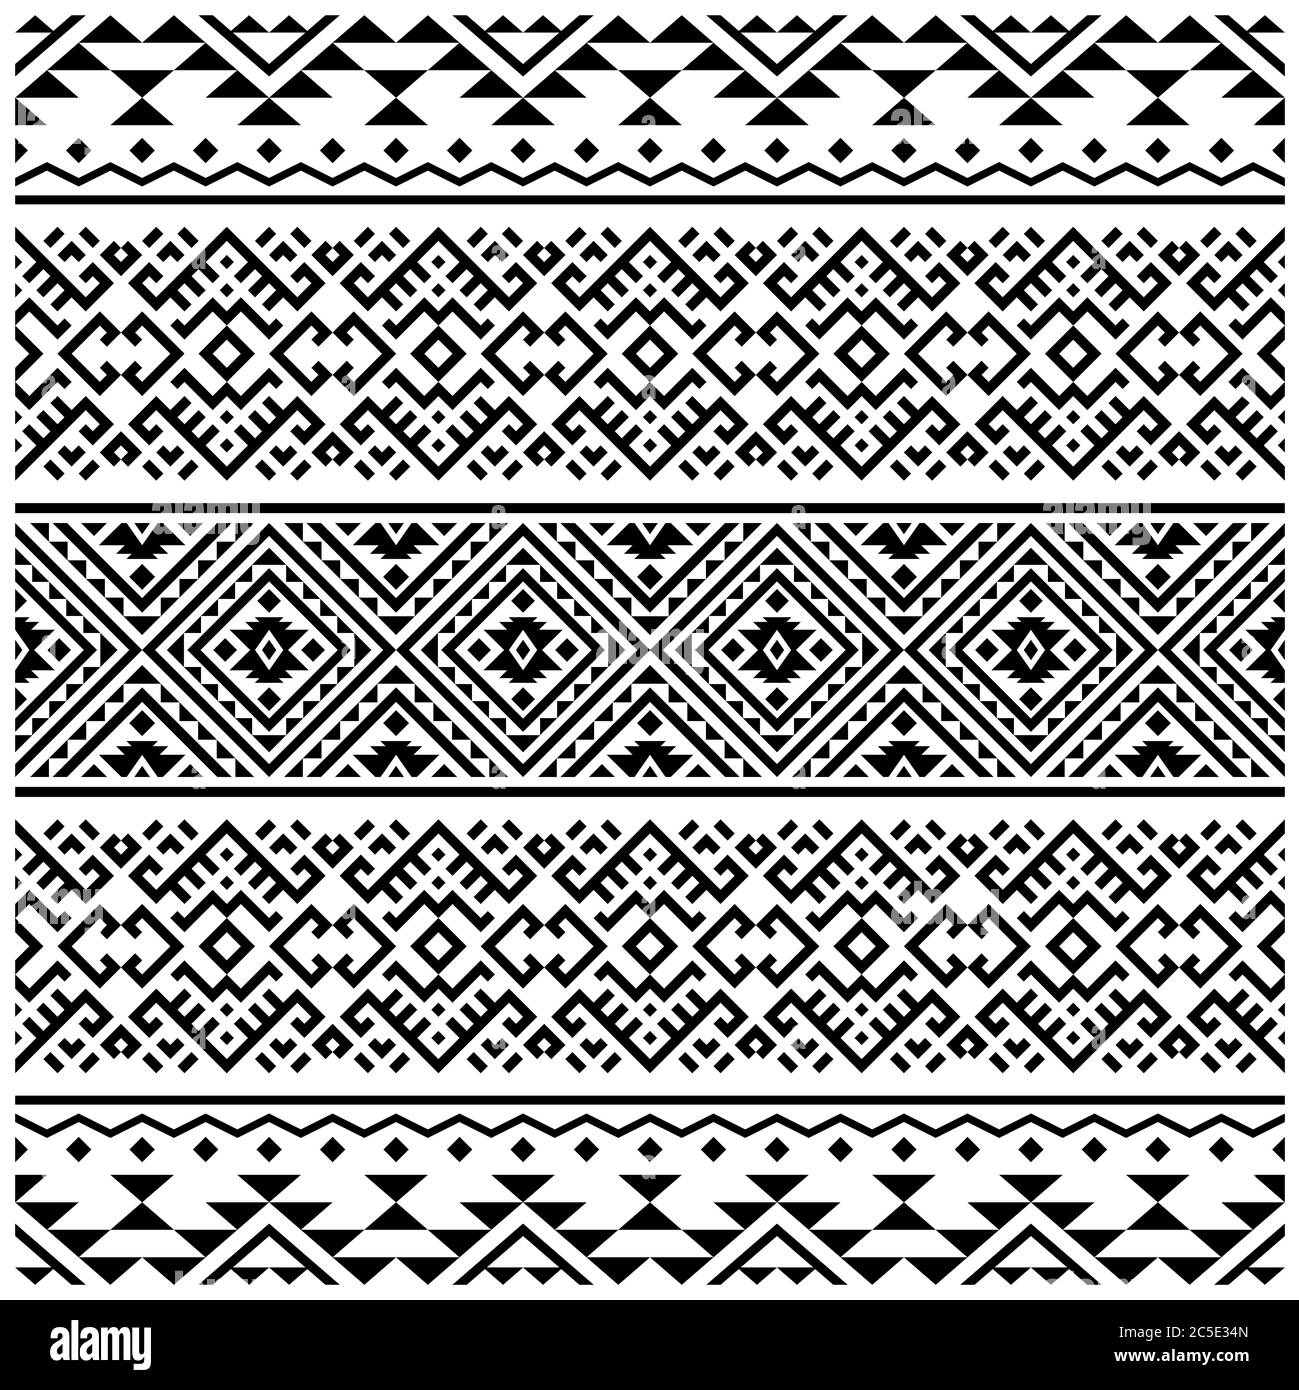 Ikat Aztec ethnic seamless pattern texture vector in black white color ...